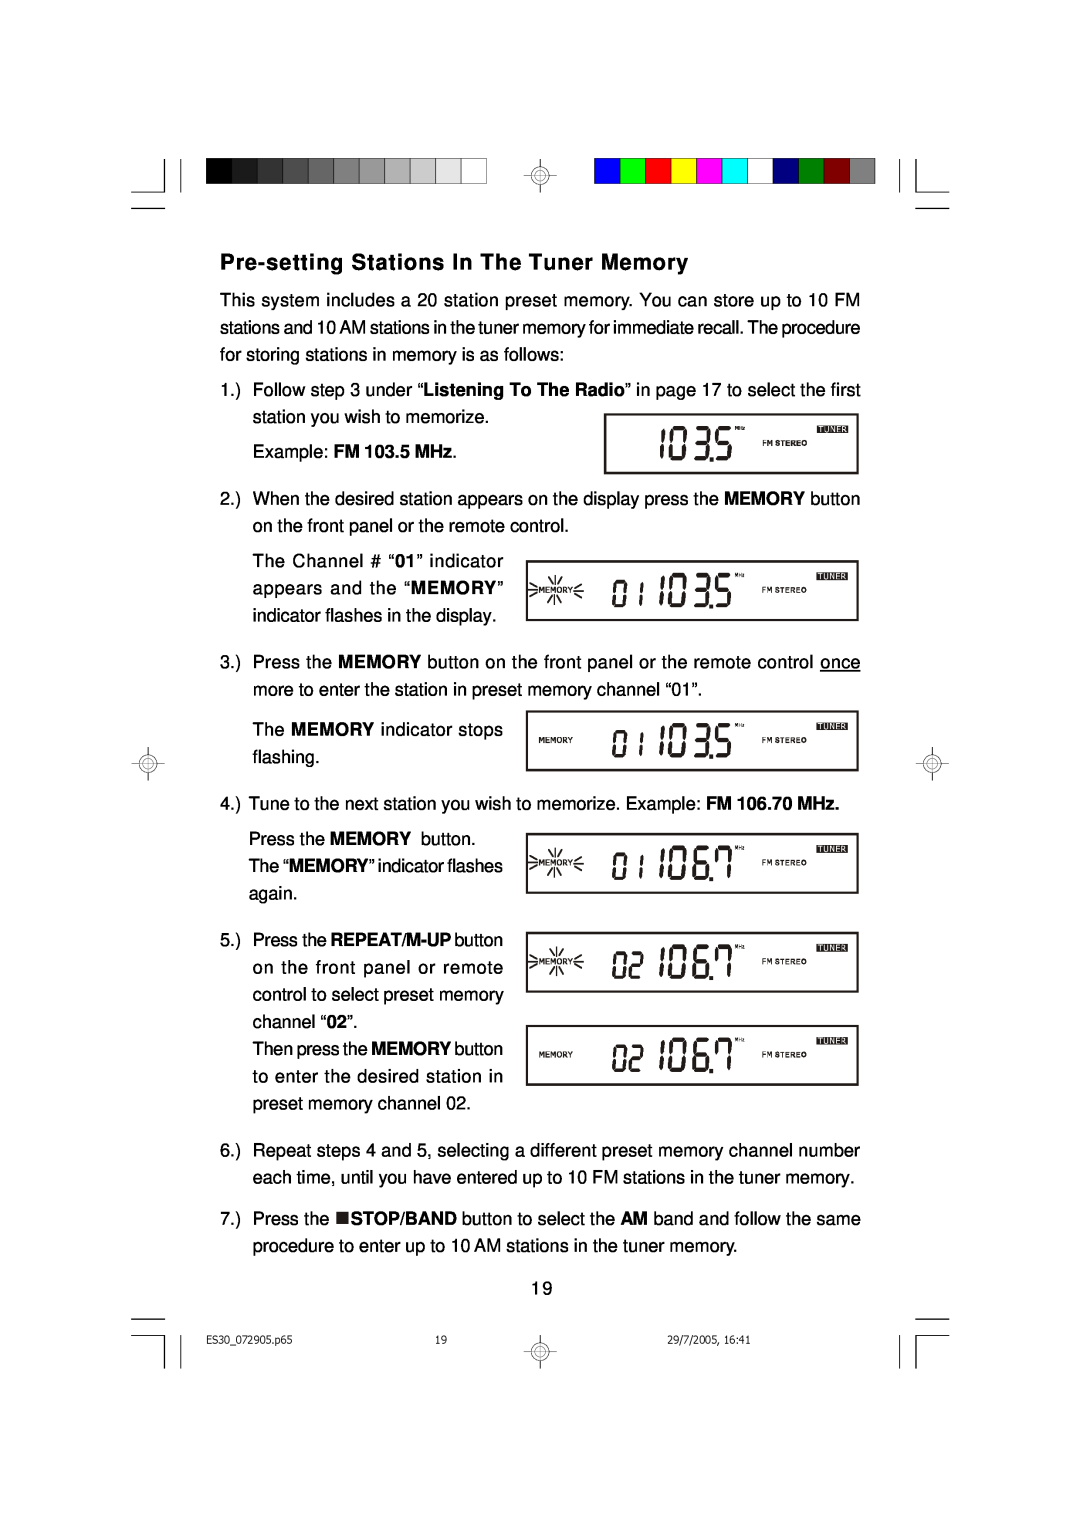 Emerson Process Management ES30 owner manual Pre-settingStations In The Tuner Memory, Example: FM 103.5 MHz 